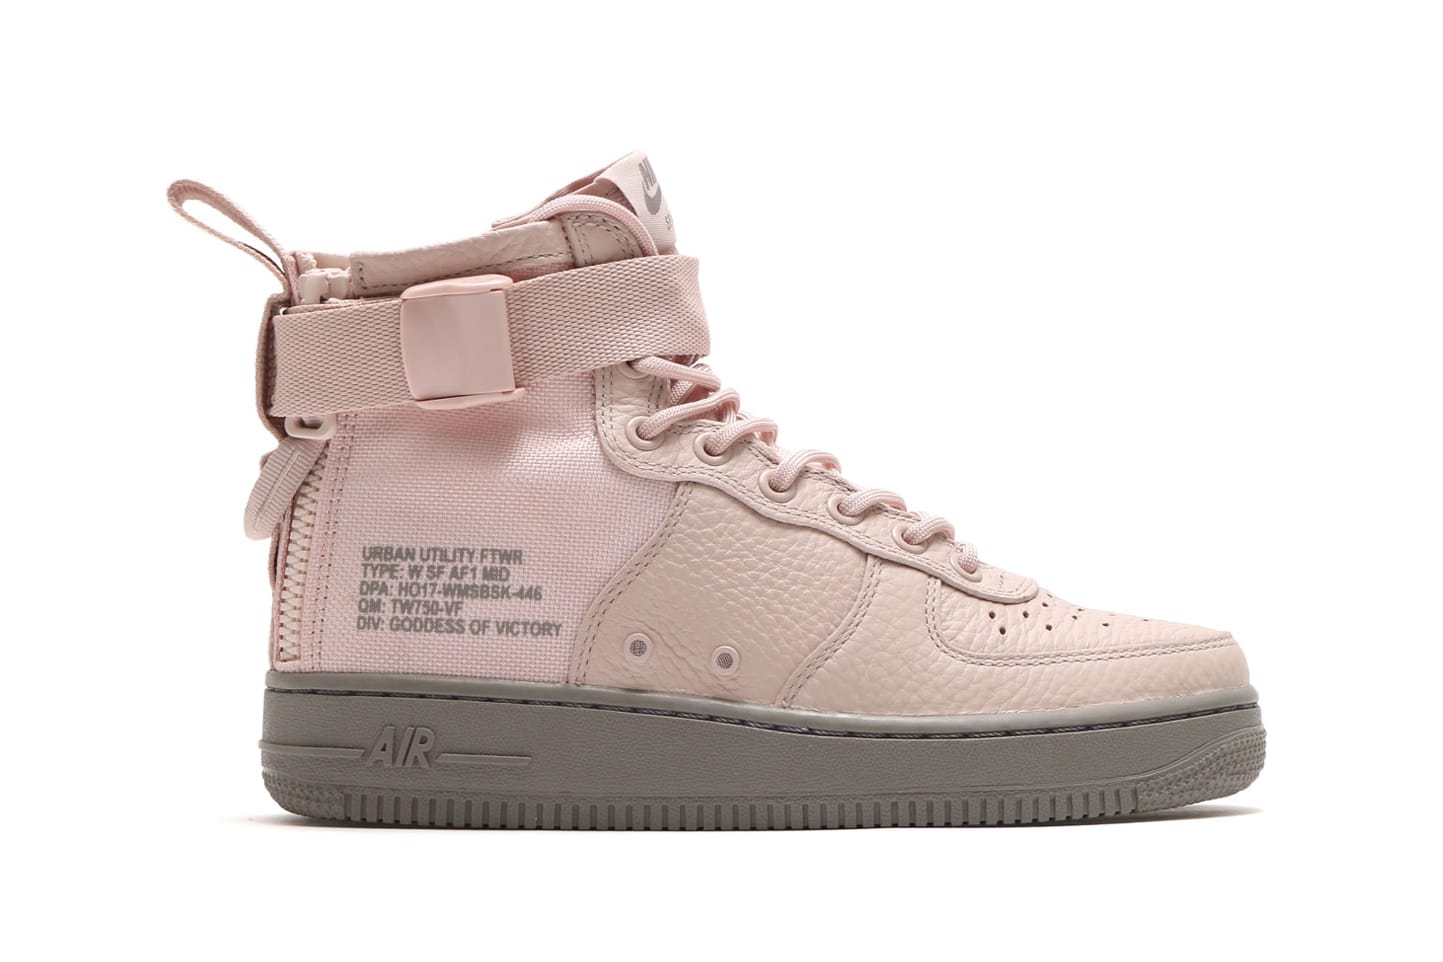 Nike Special Field Air Force 1 Mid in 